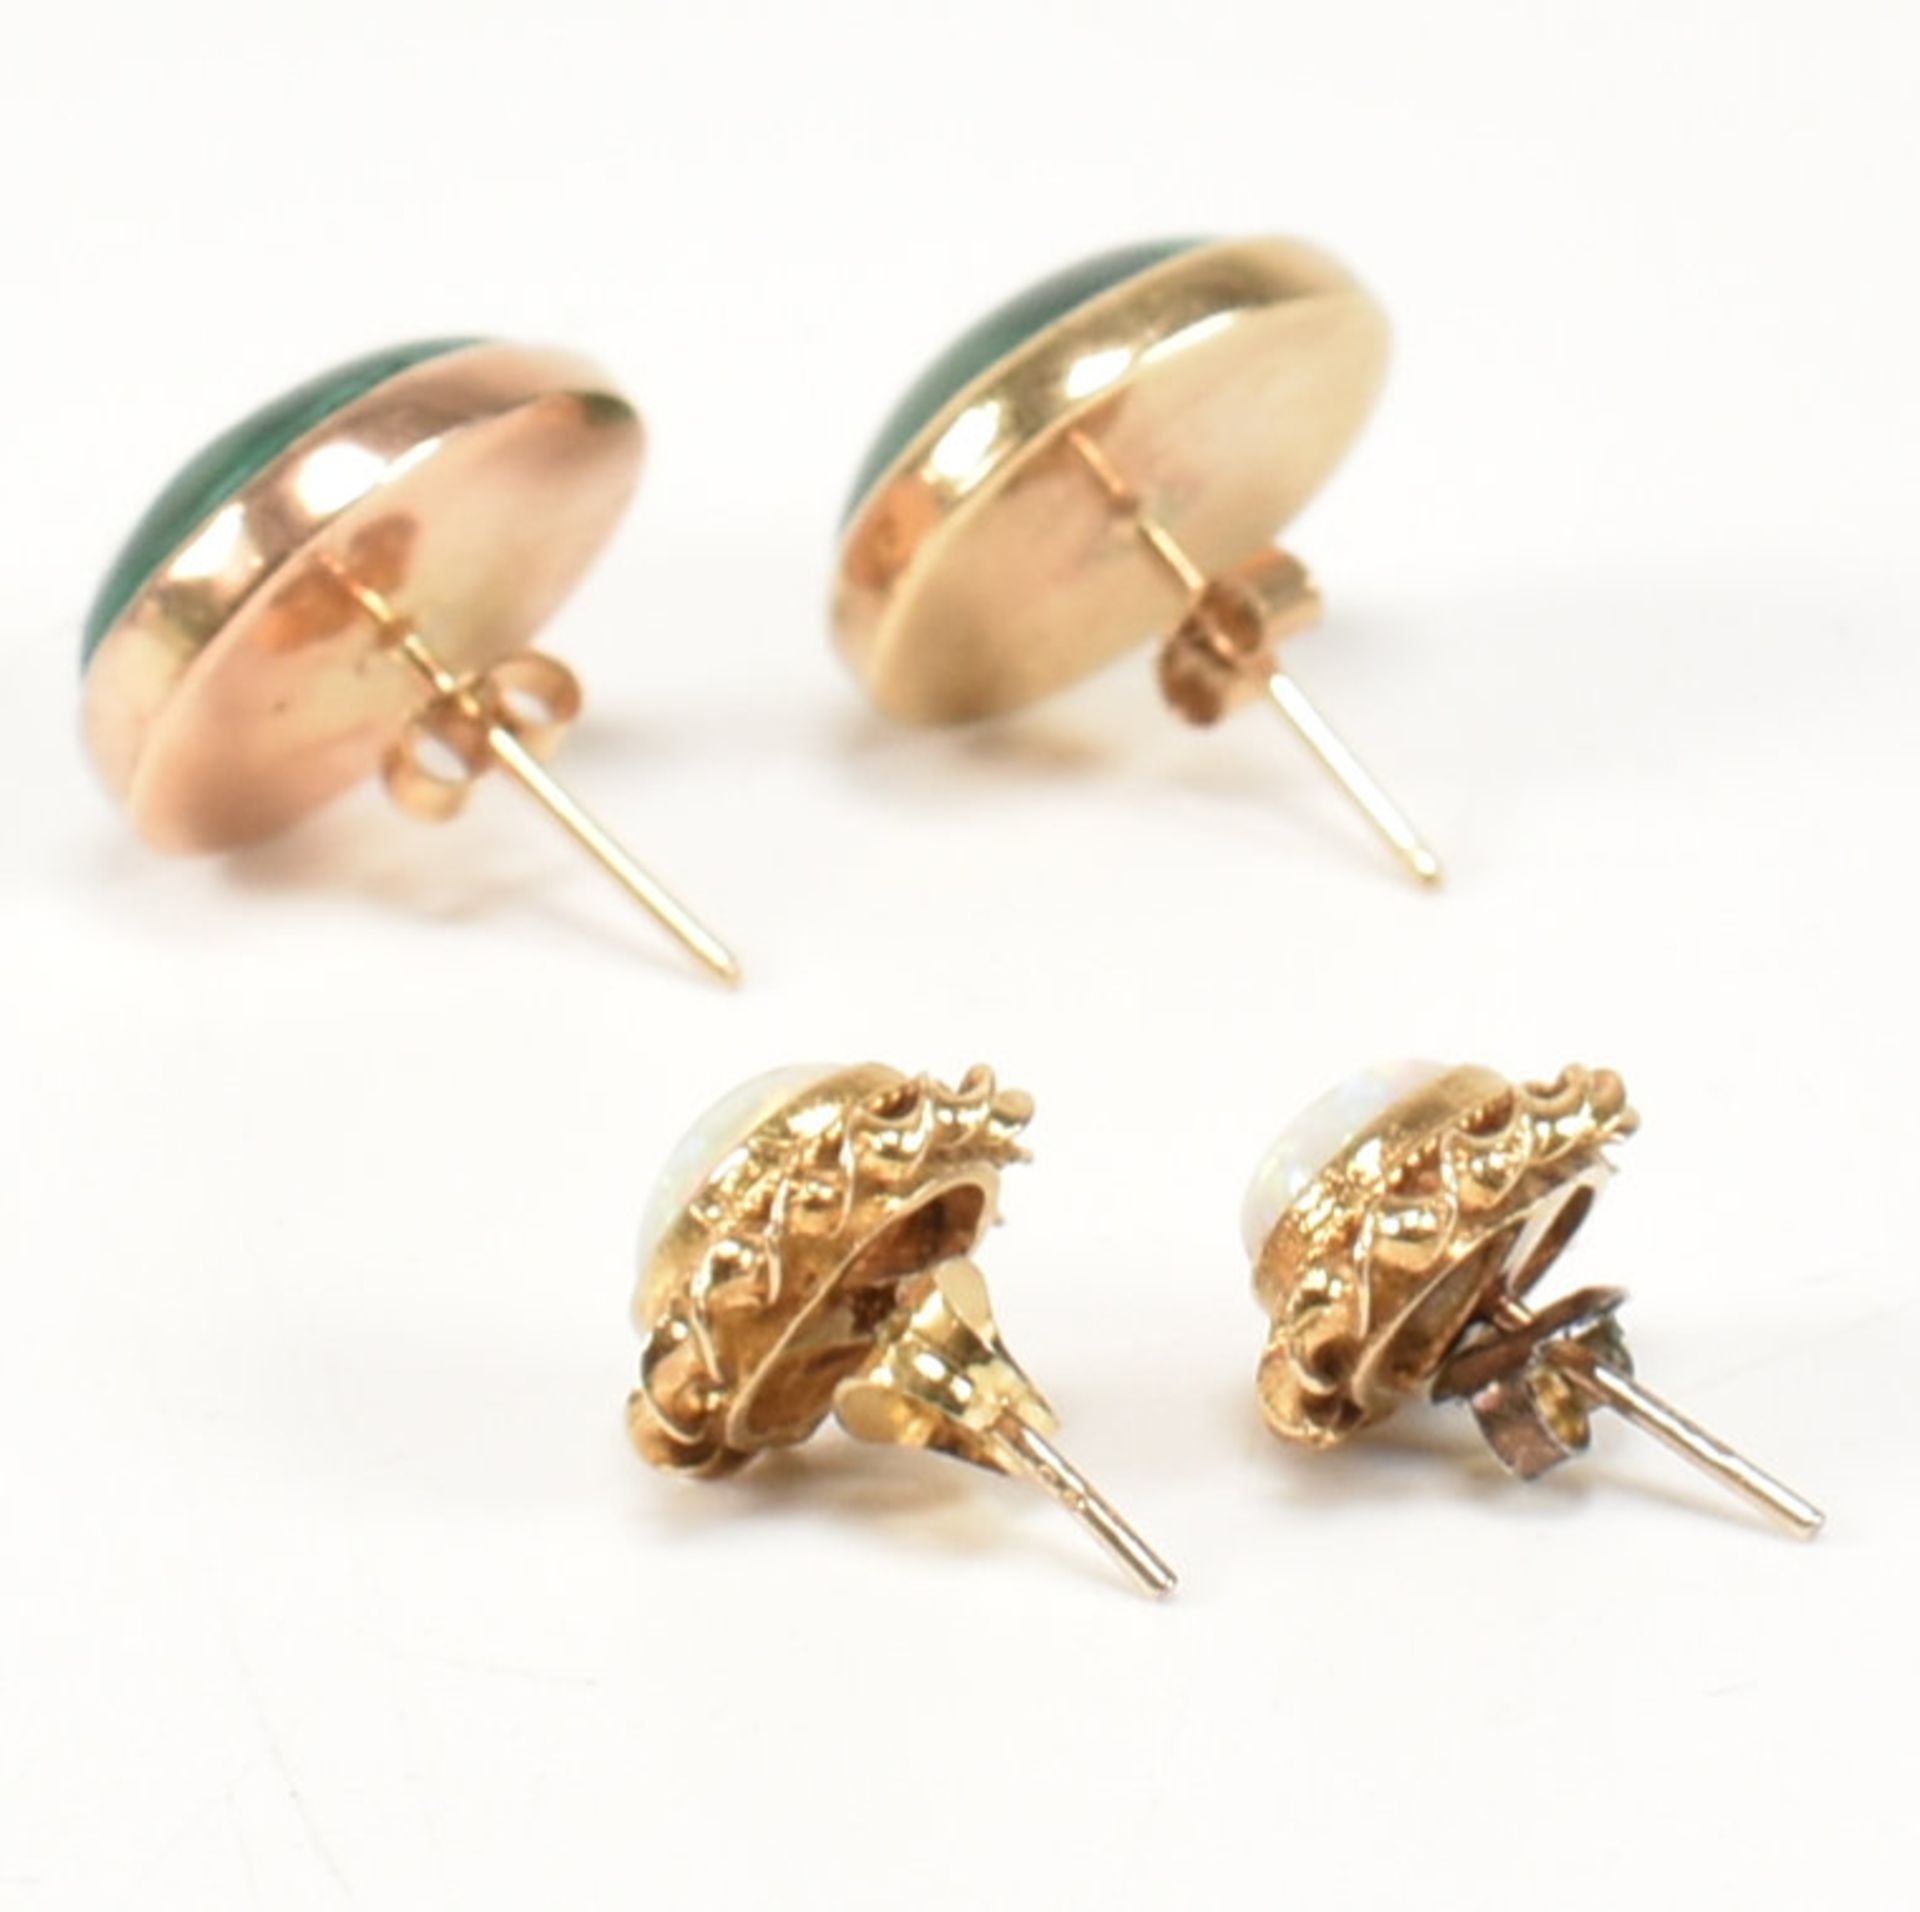 TWO PAIRS OF 9CT GOLD STUD EARRINGS - Image 3 of 8